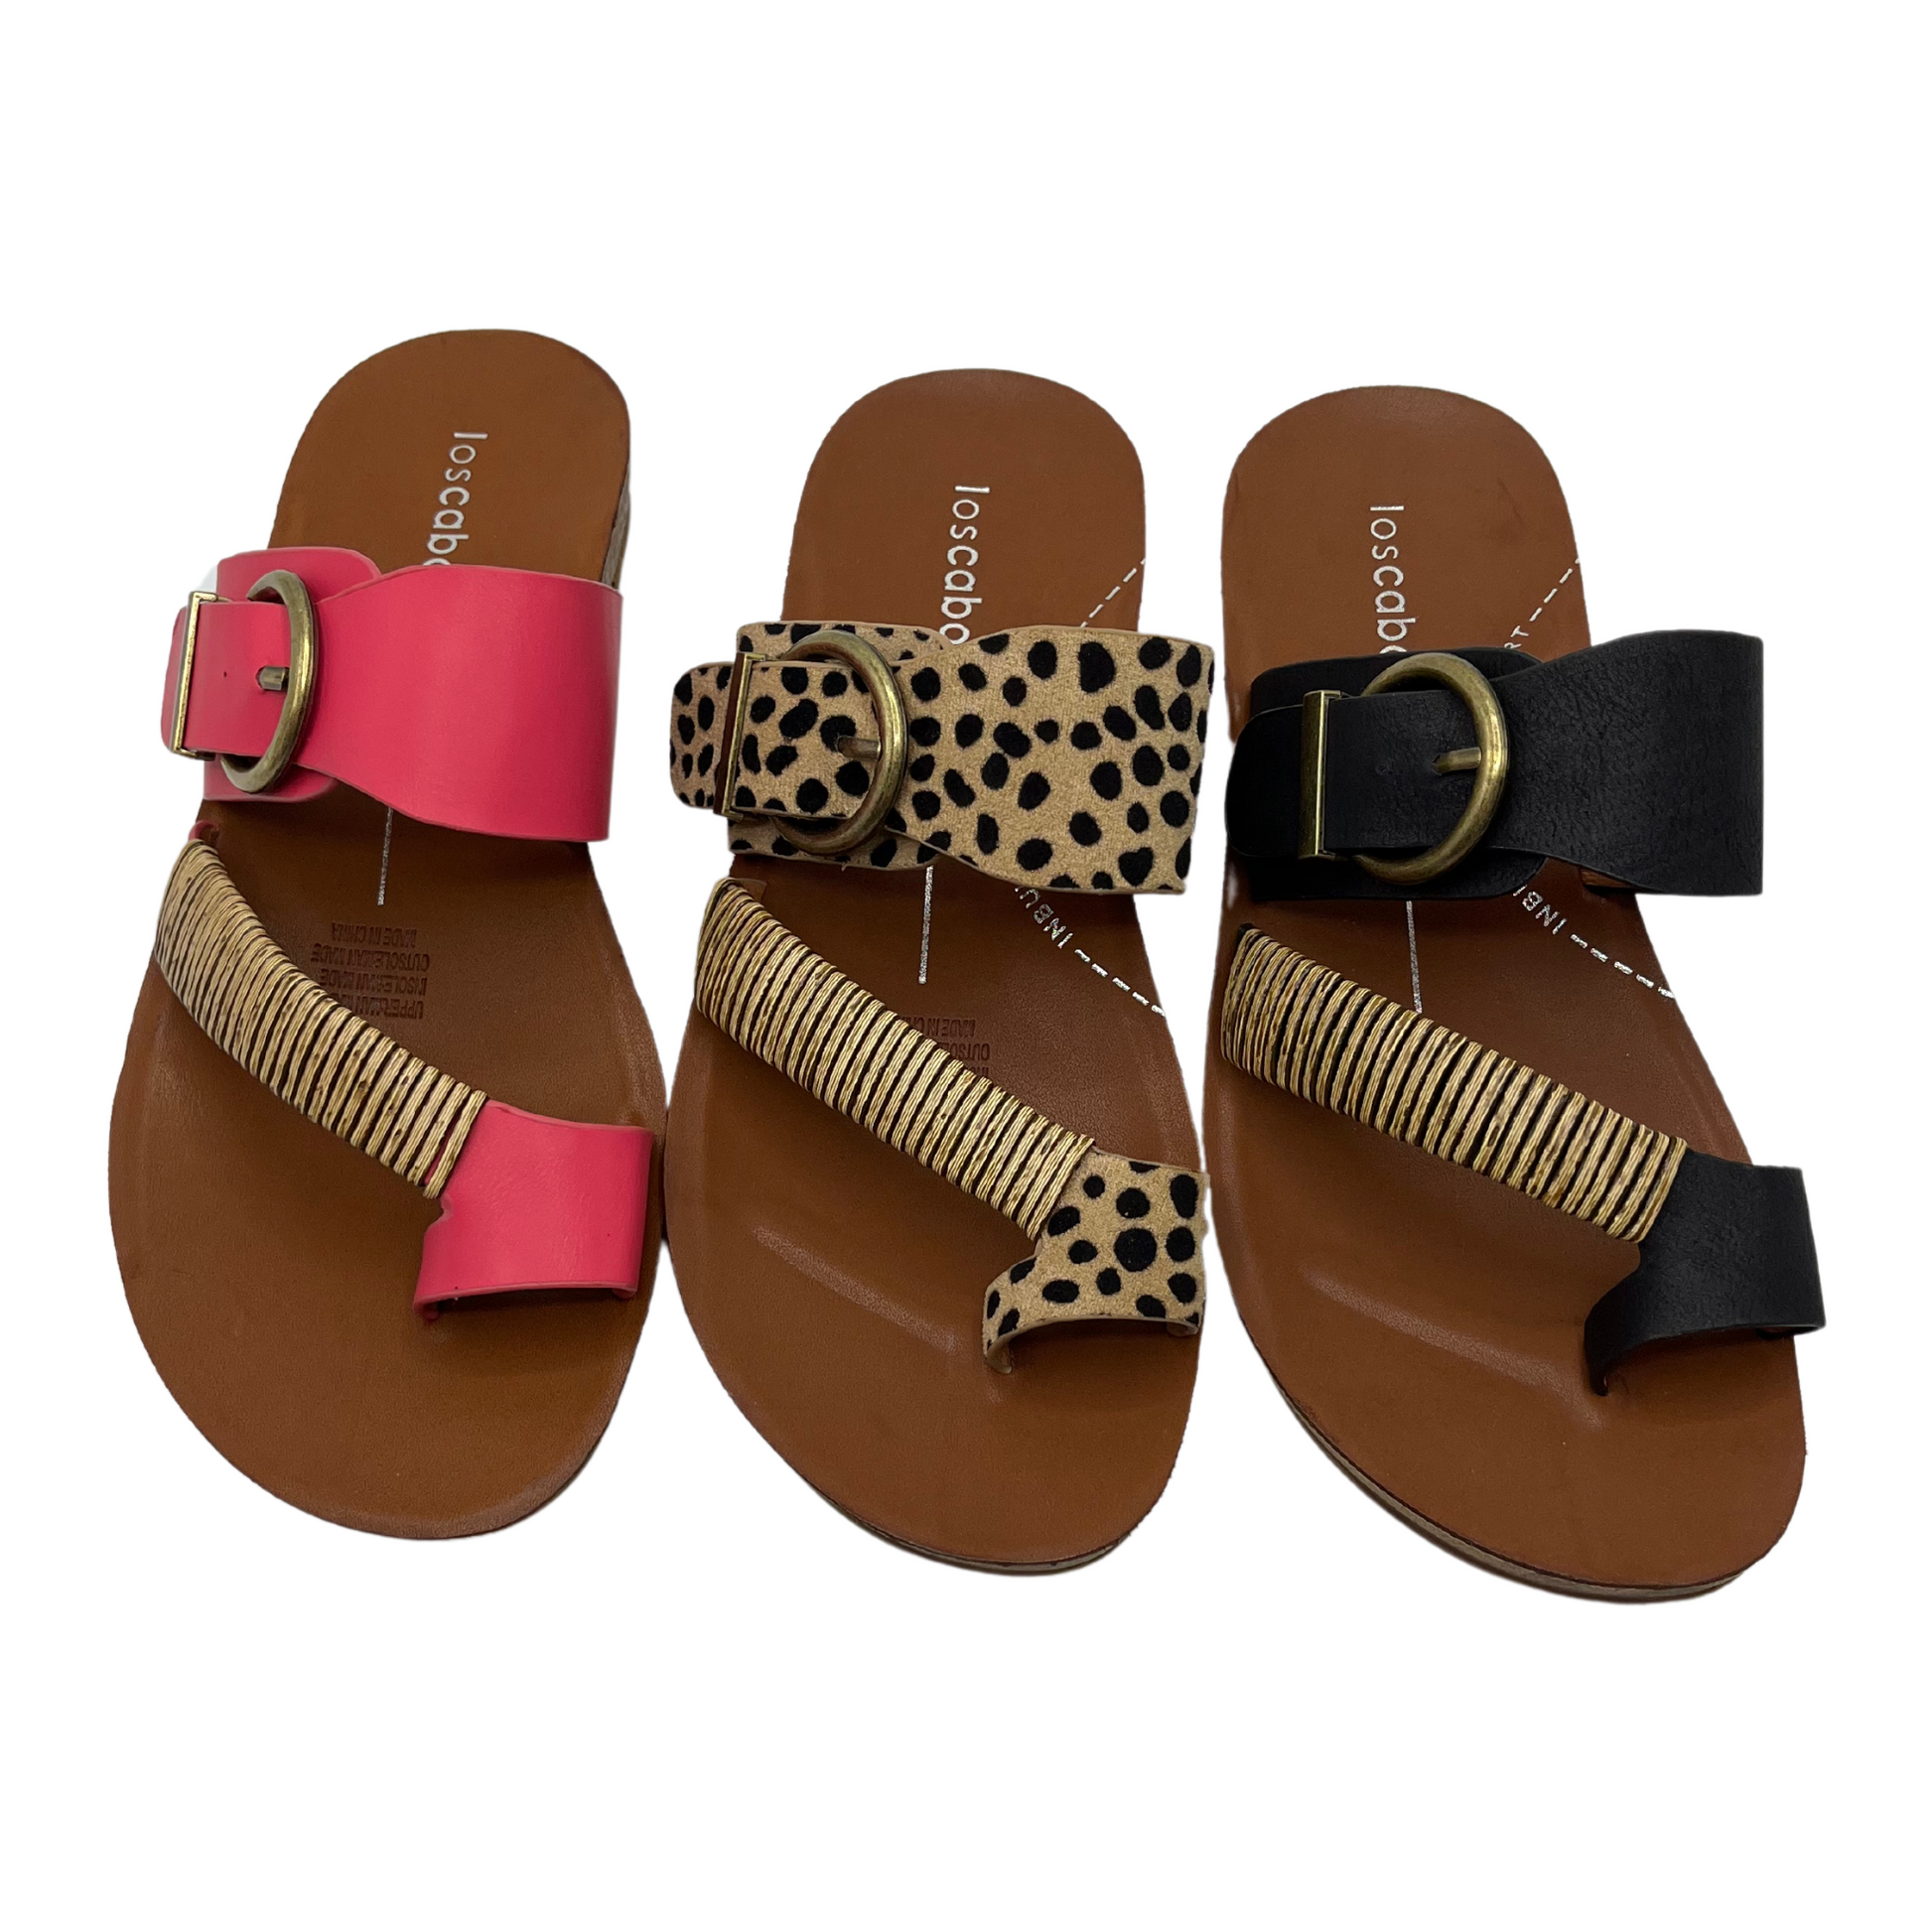 Upper view of three sandals in a row. Left one is fuchsia, middle one is cheetah print and right one is black. All have brown insoles